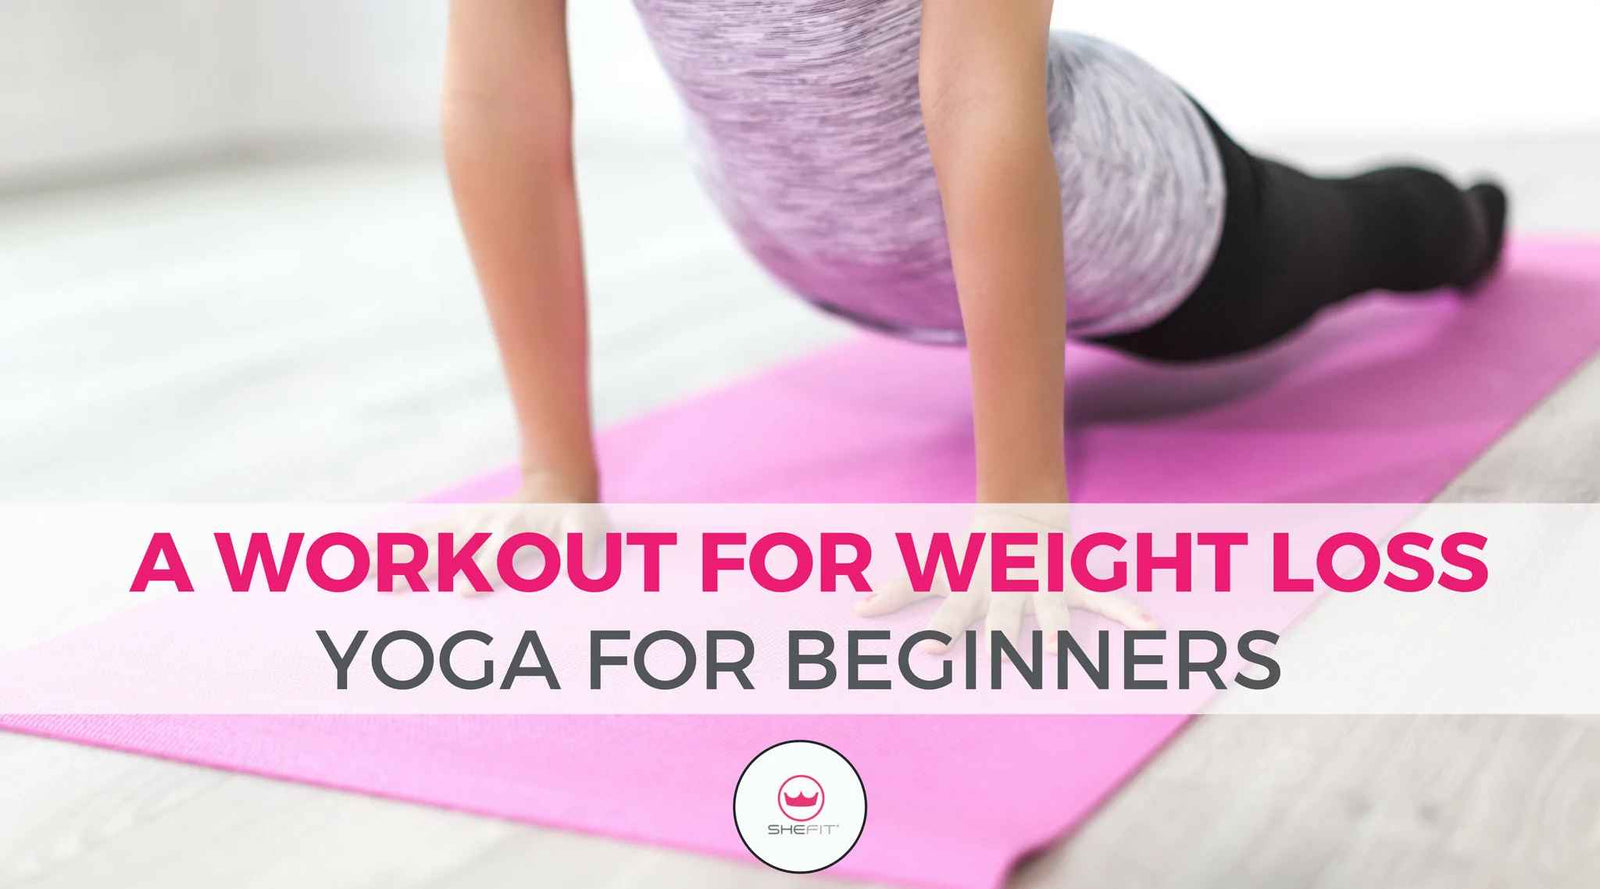 Yoga for Beginners: A Workout for Weight Loss - SHEFIT